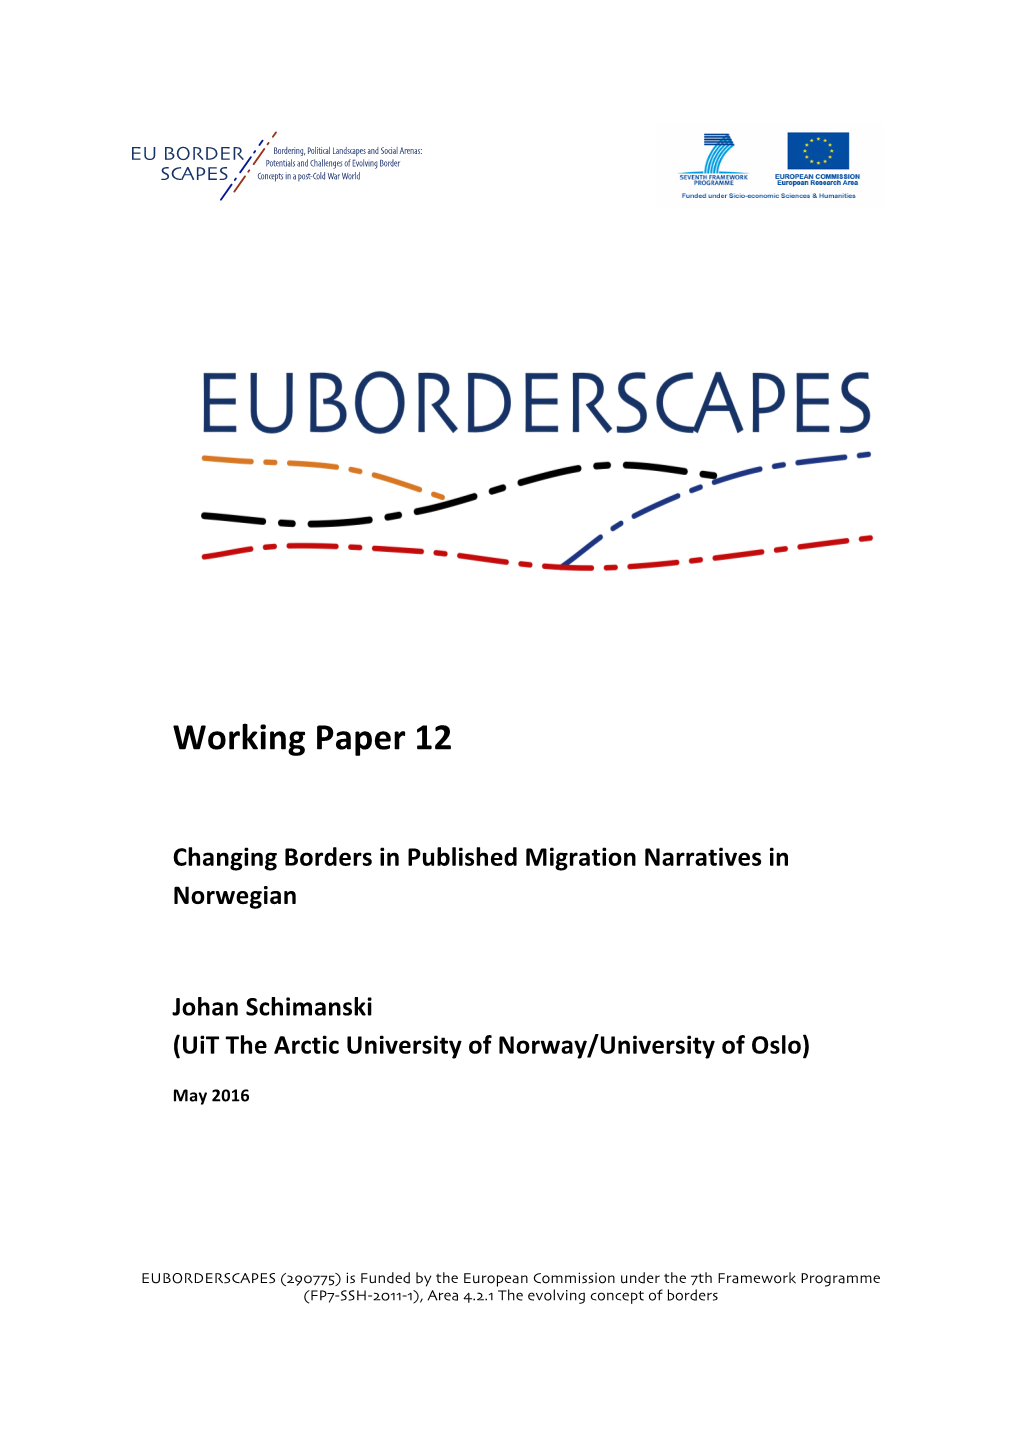 Changing Borders in Public Immigrant and Diaspora Narratives in Norwegian Wp